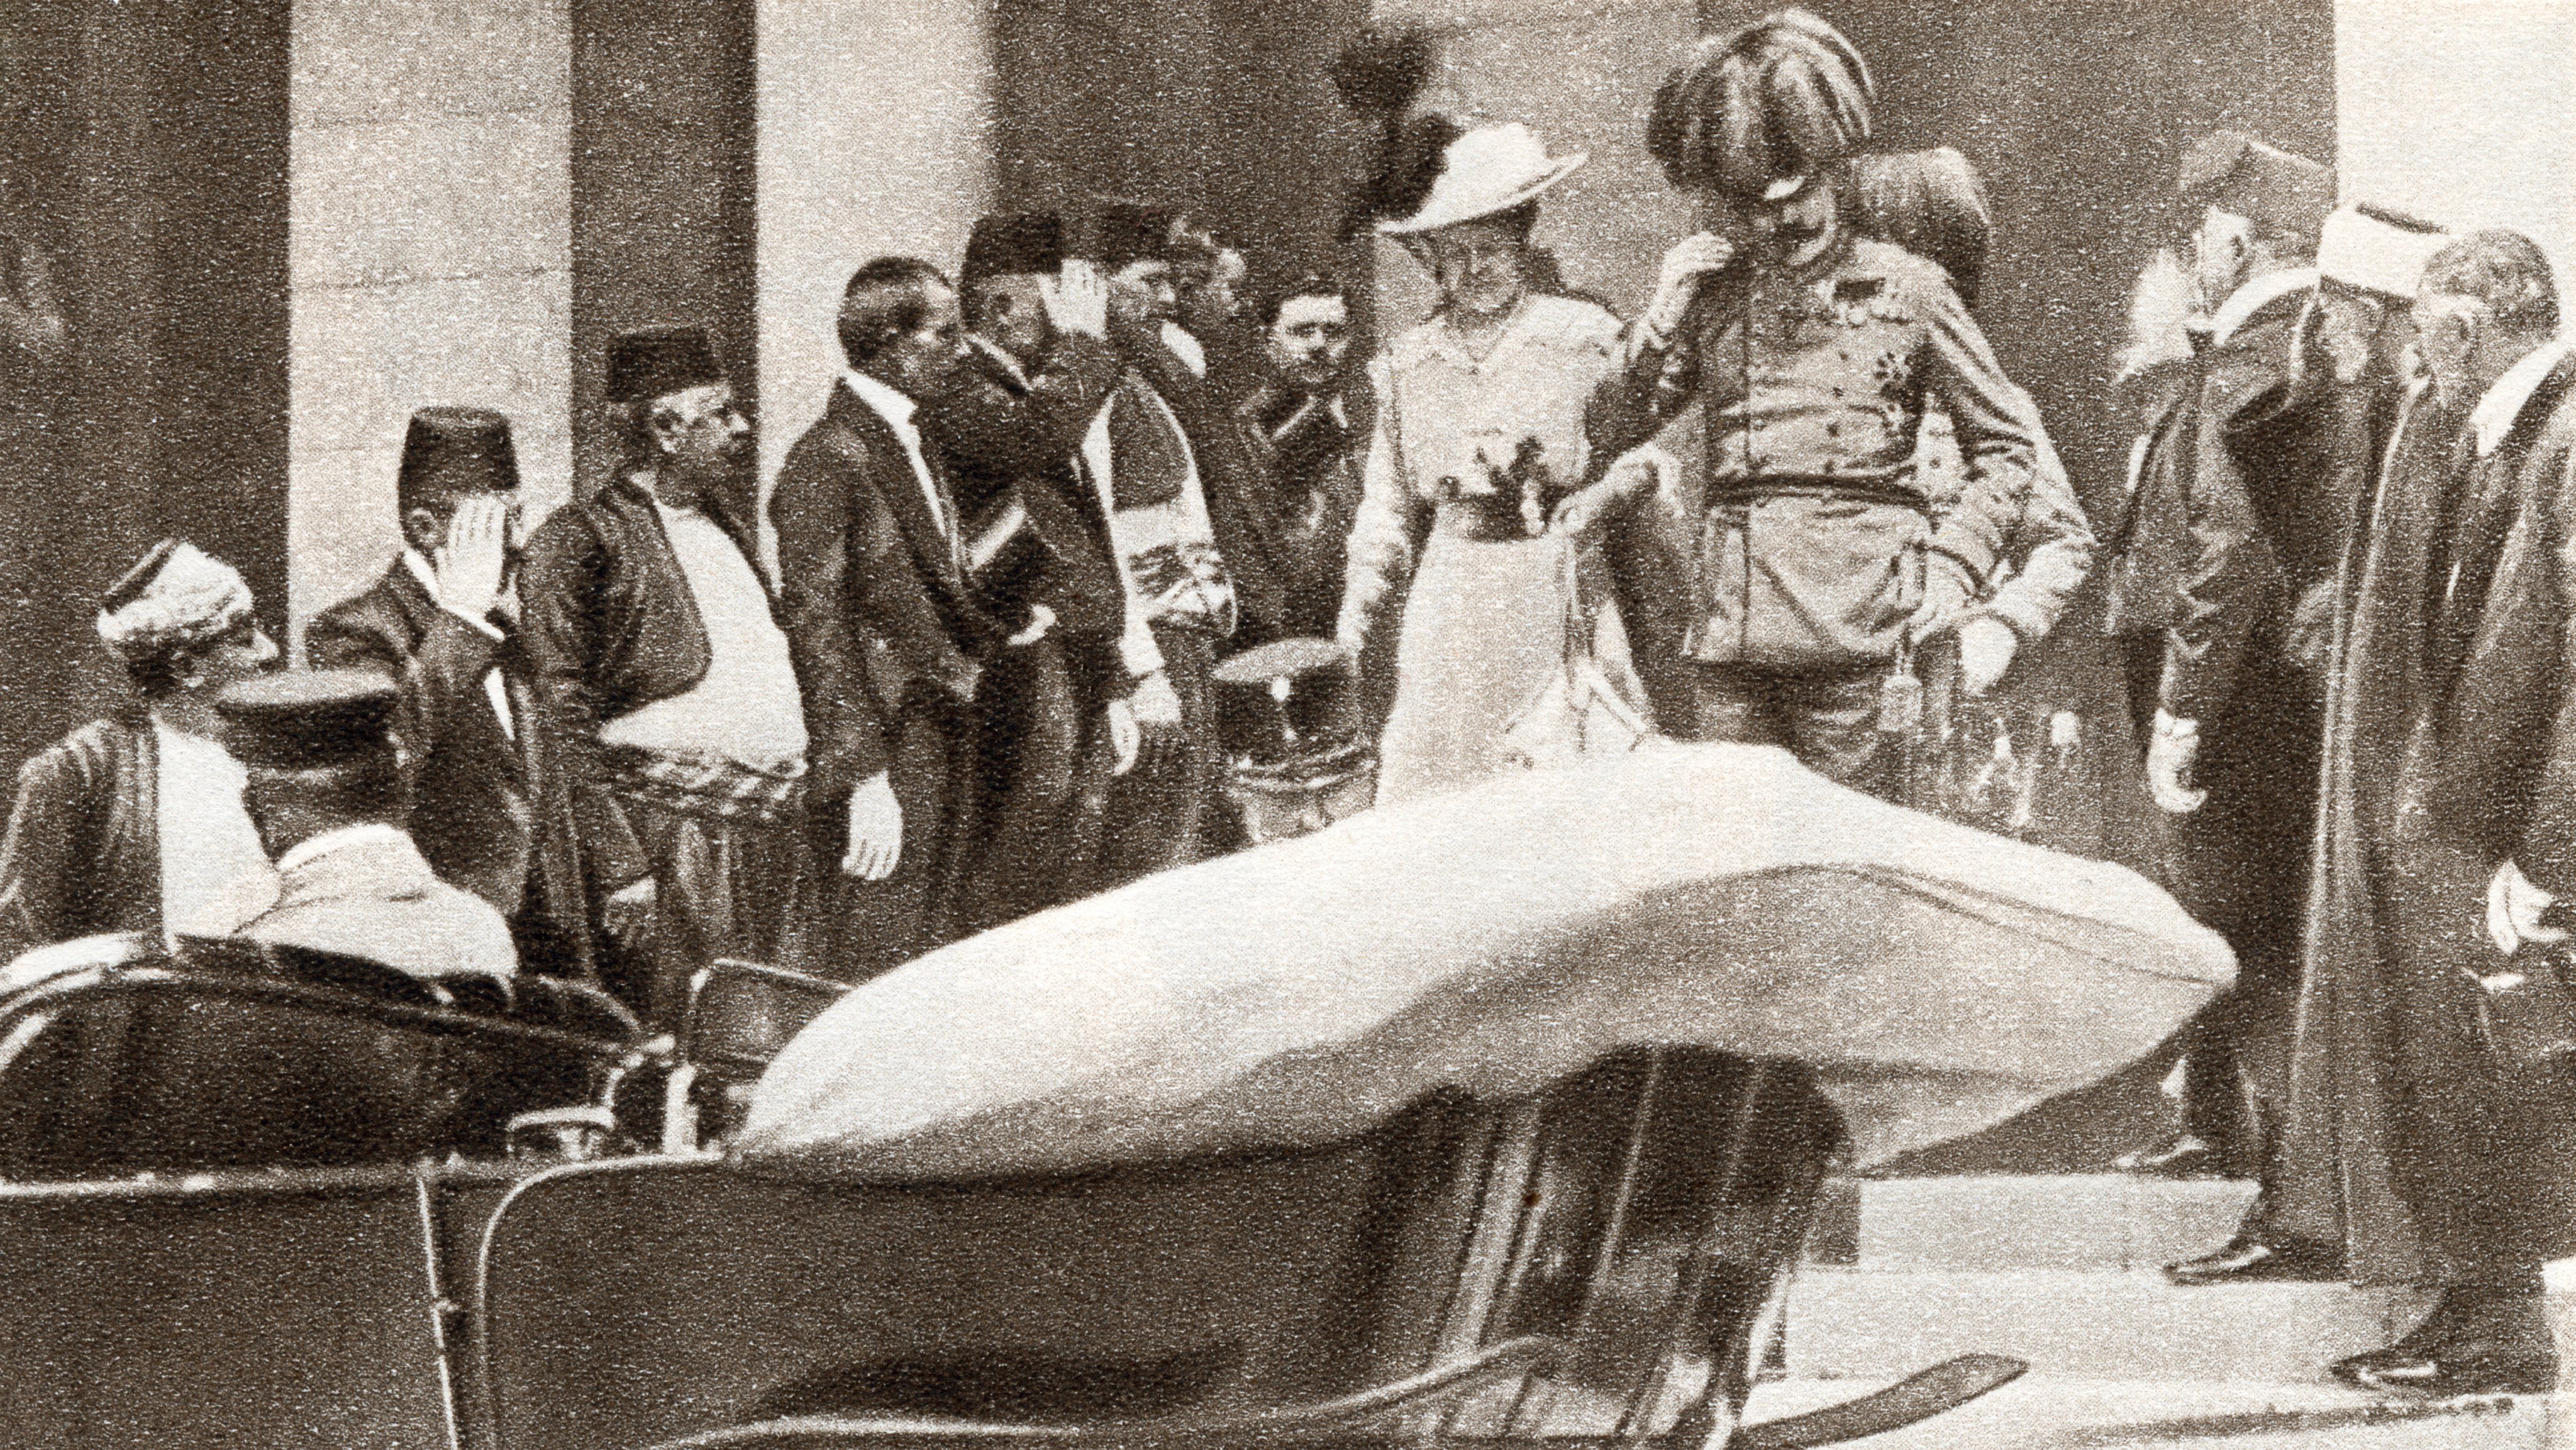 Franz Ferdinand Archduke of Austria and his wife Sophie, Duchess of Hohenberg moments before they were assassinated in Sarajevo on June 28, 1914